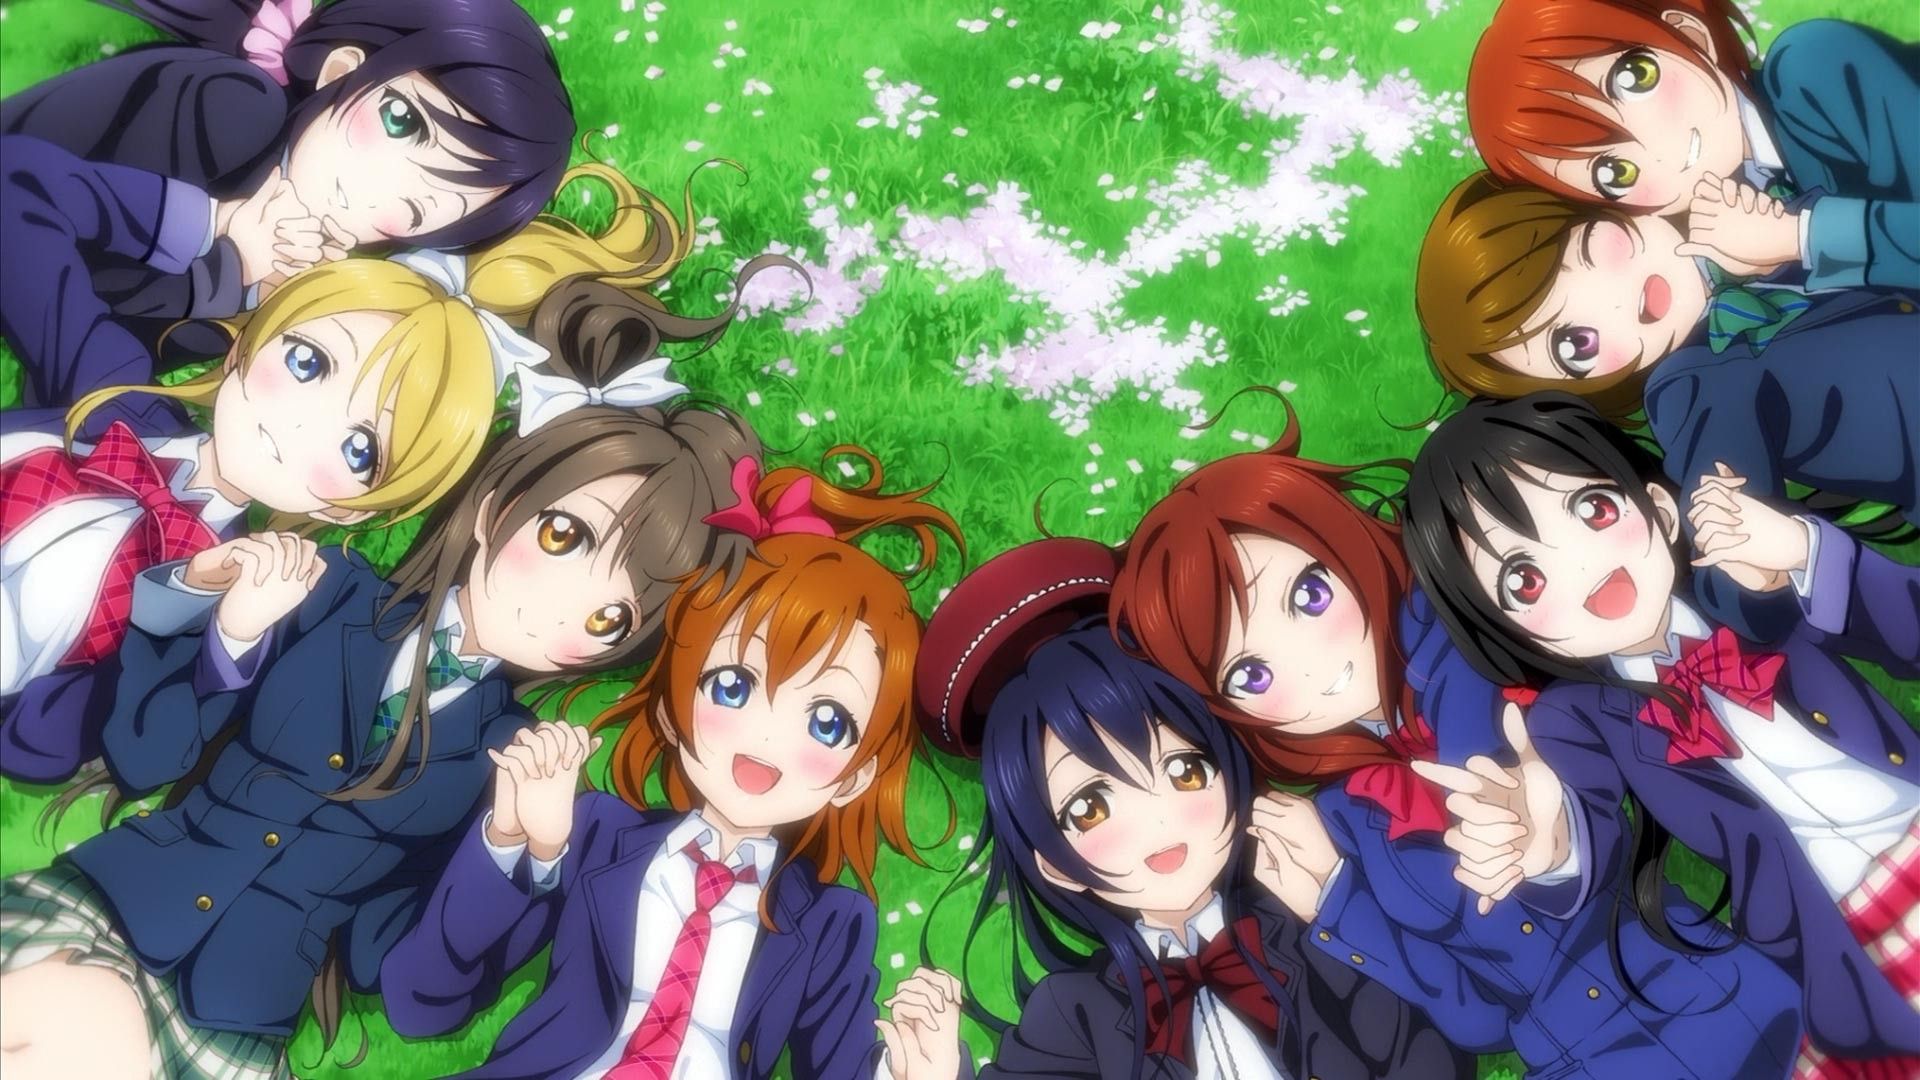 Love live! Wallpaper 05 [15 pictures] 1